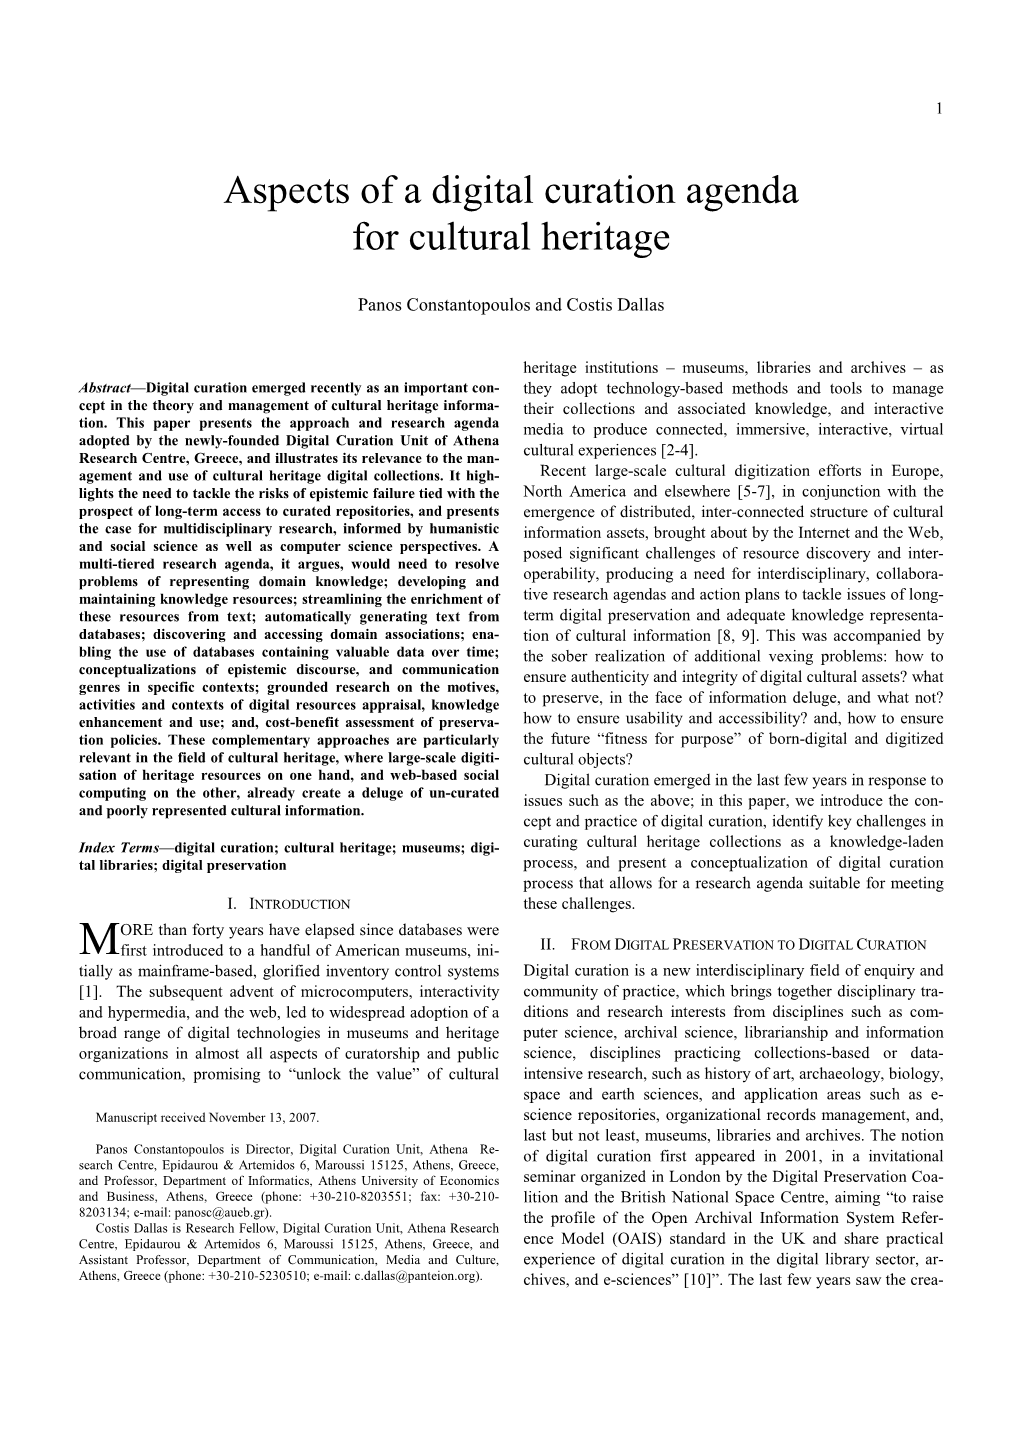 Aspects of a Digital Curation Agenda for Cultural Heritage